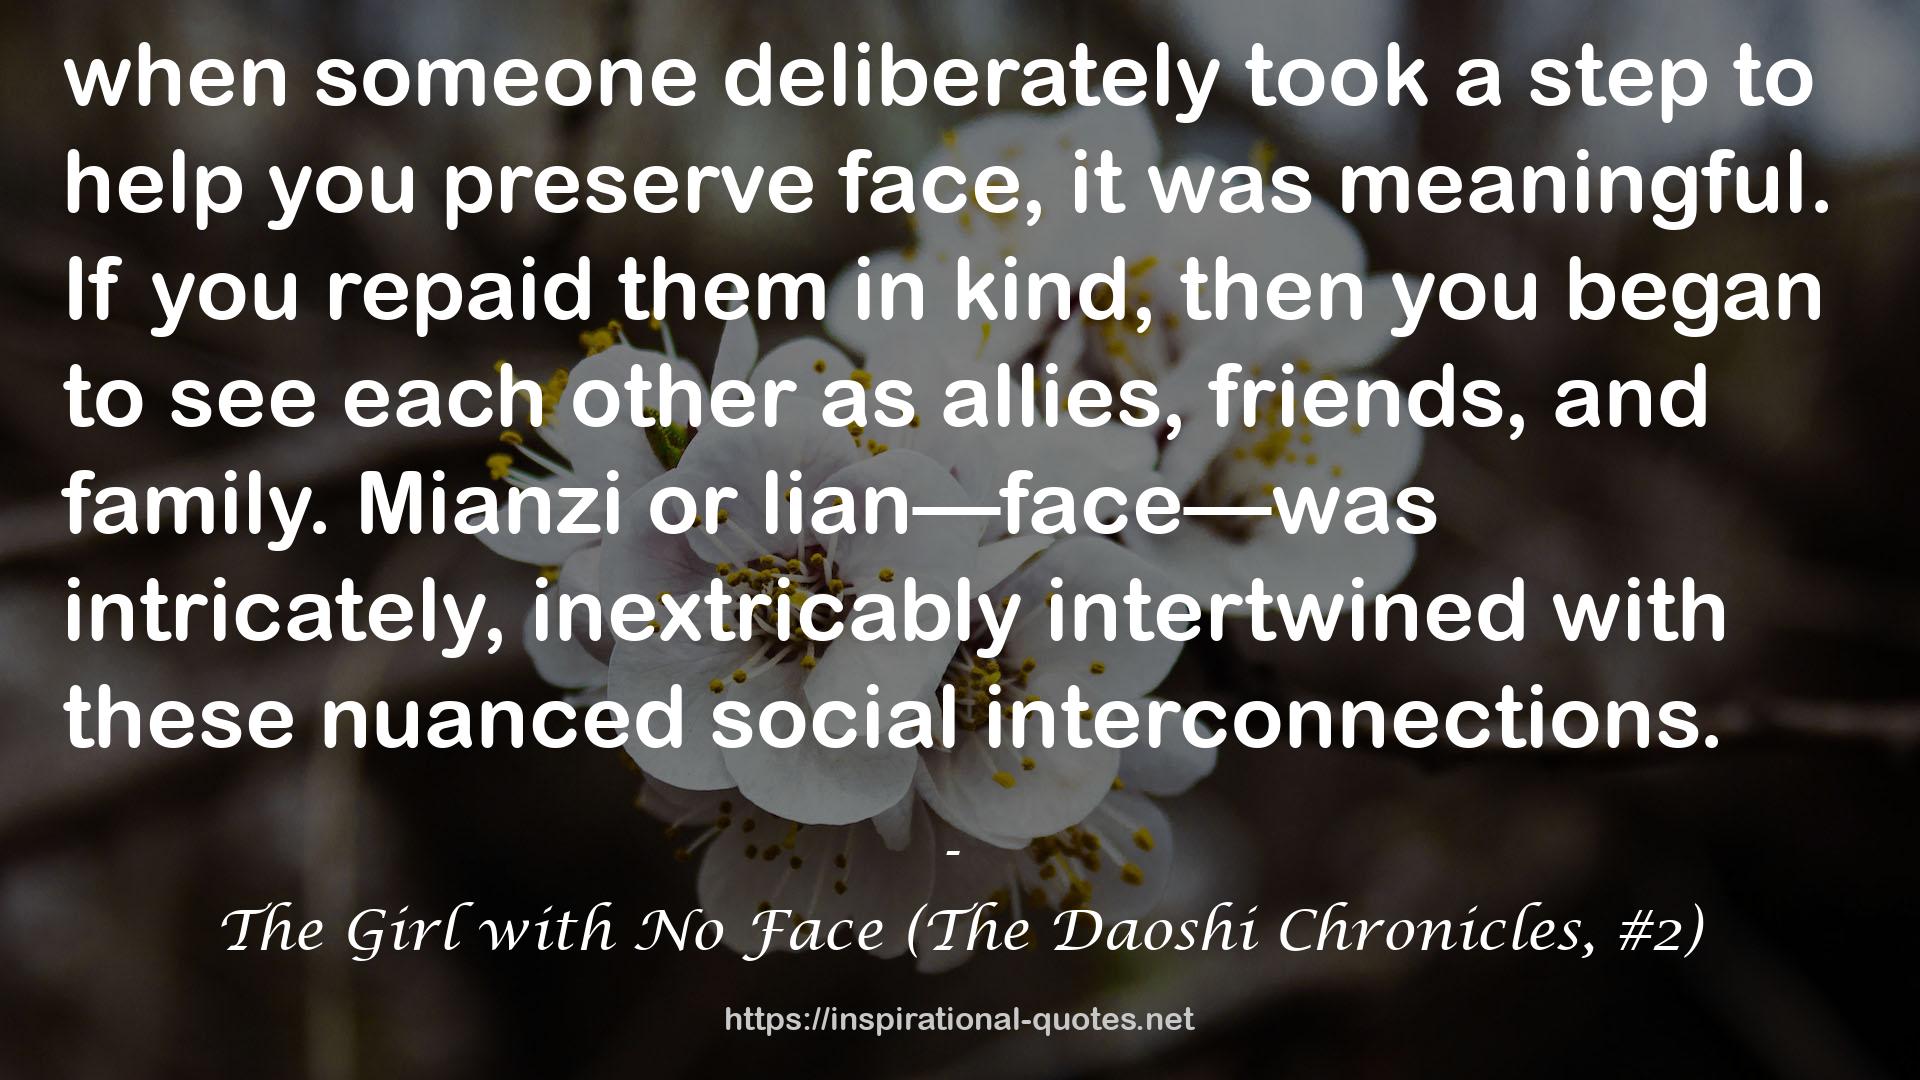 The Girl with No Face (The Daoshi Chronicles, #2) QUOTES